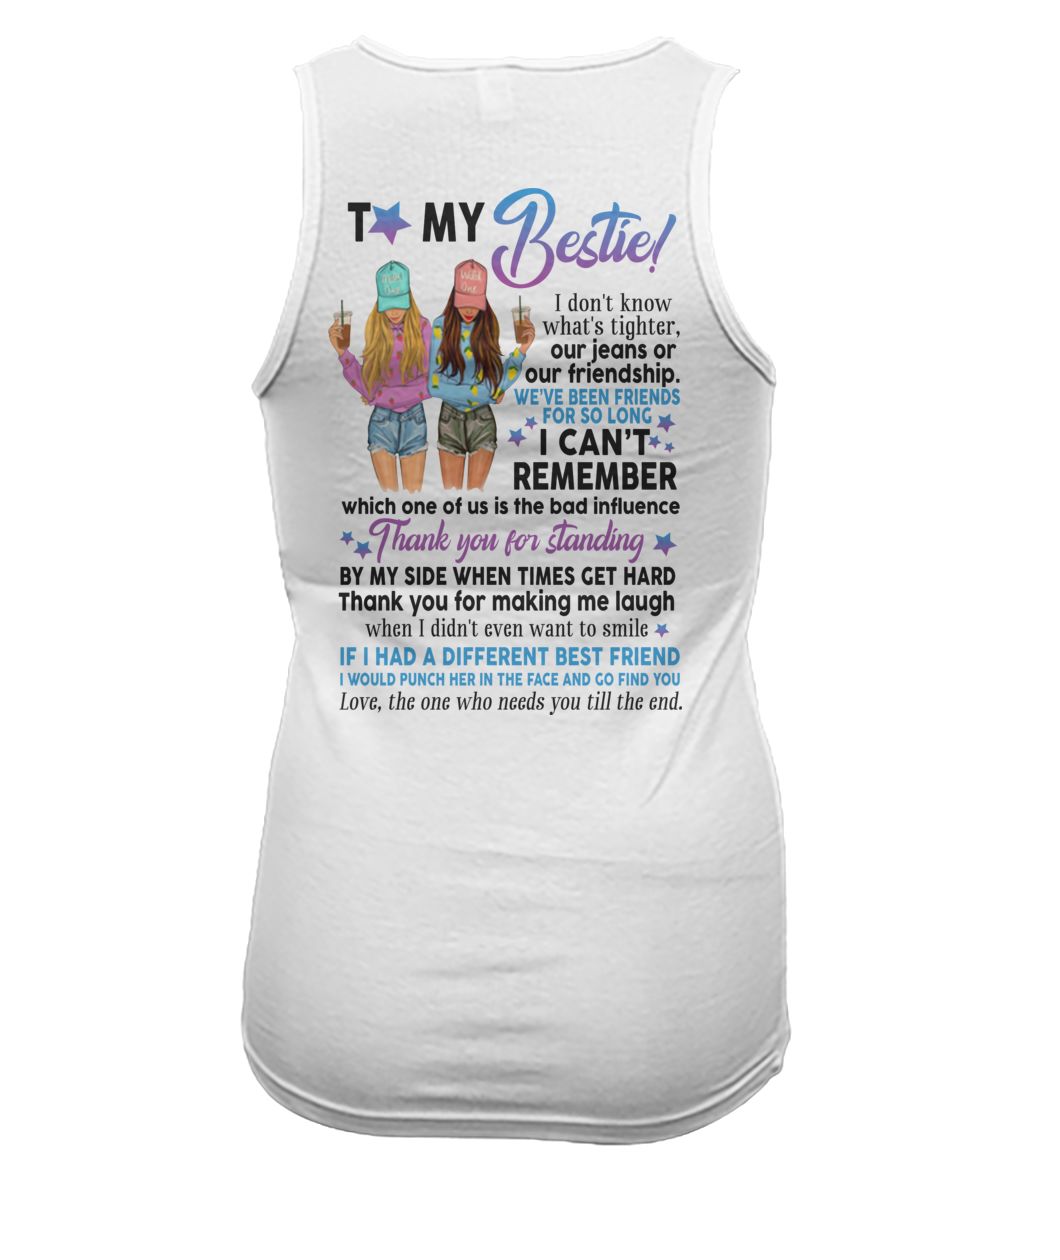 To my bestie I don't know what's tighter our jeans or our friendship women's tank top